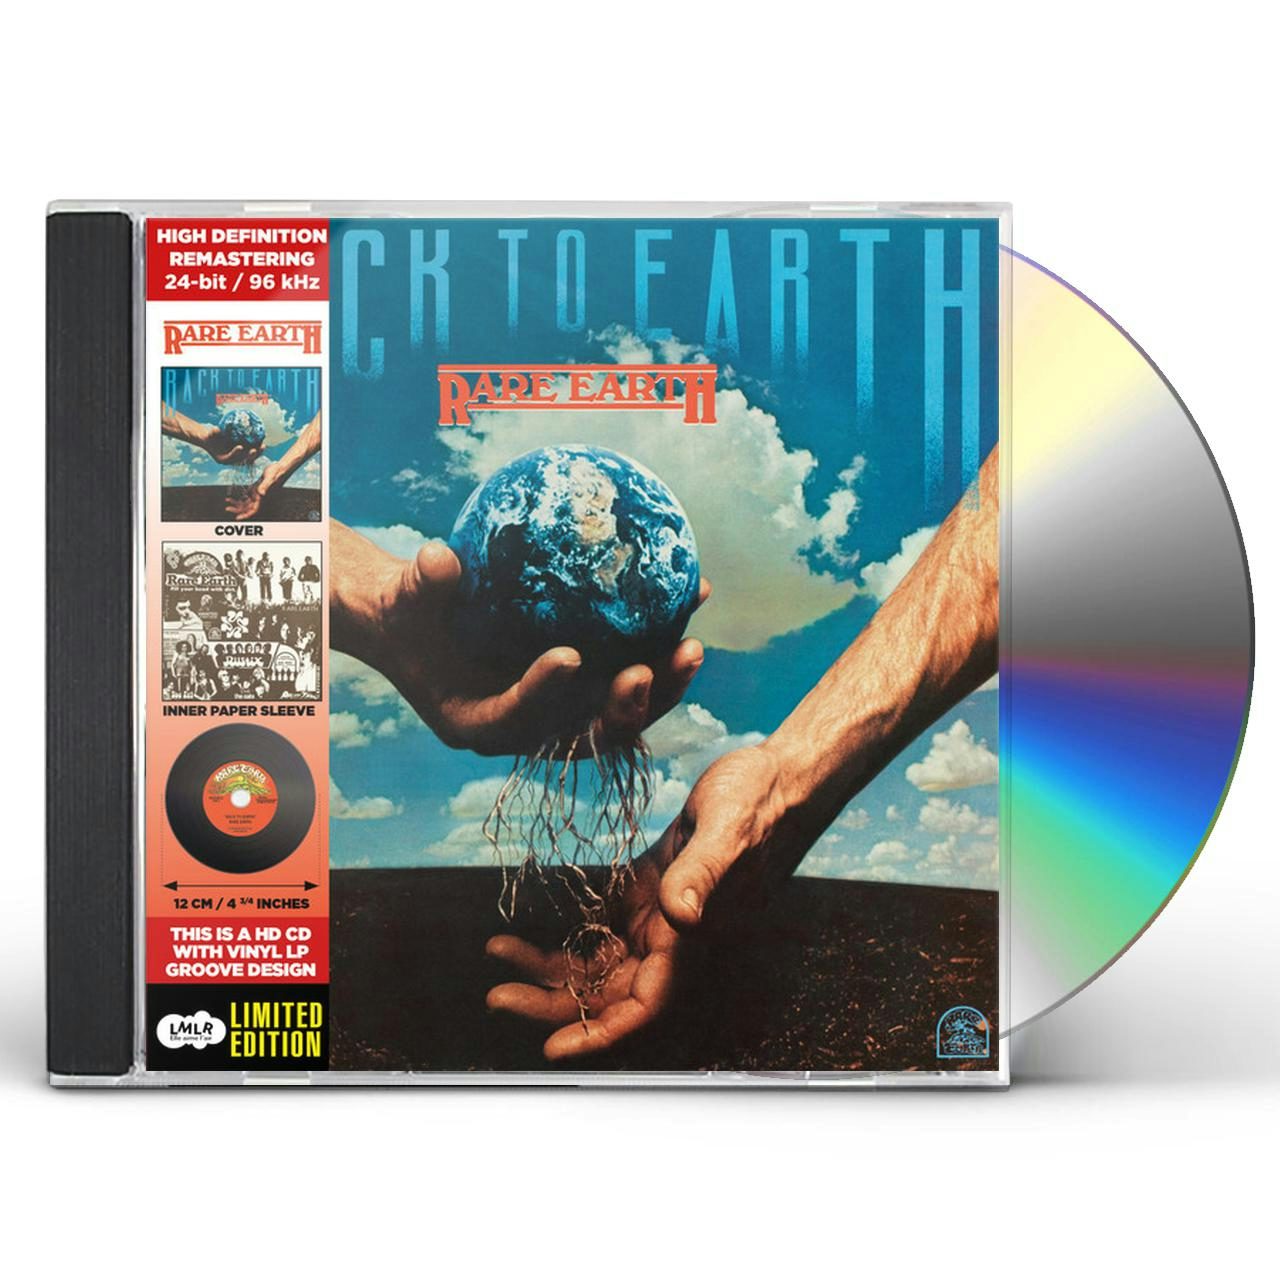 back to earth cd